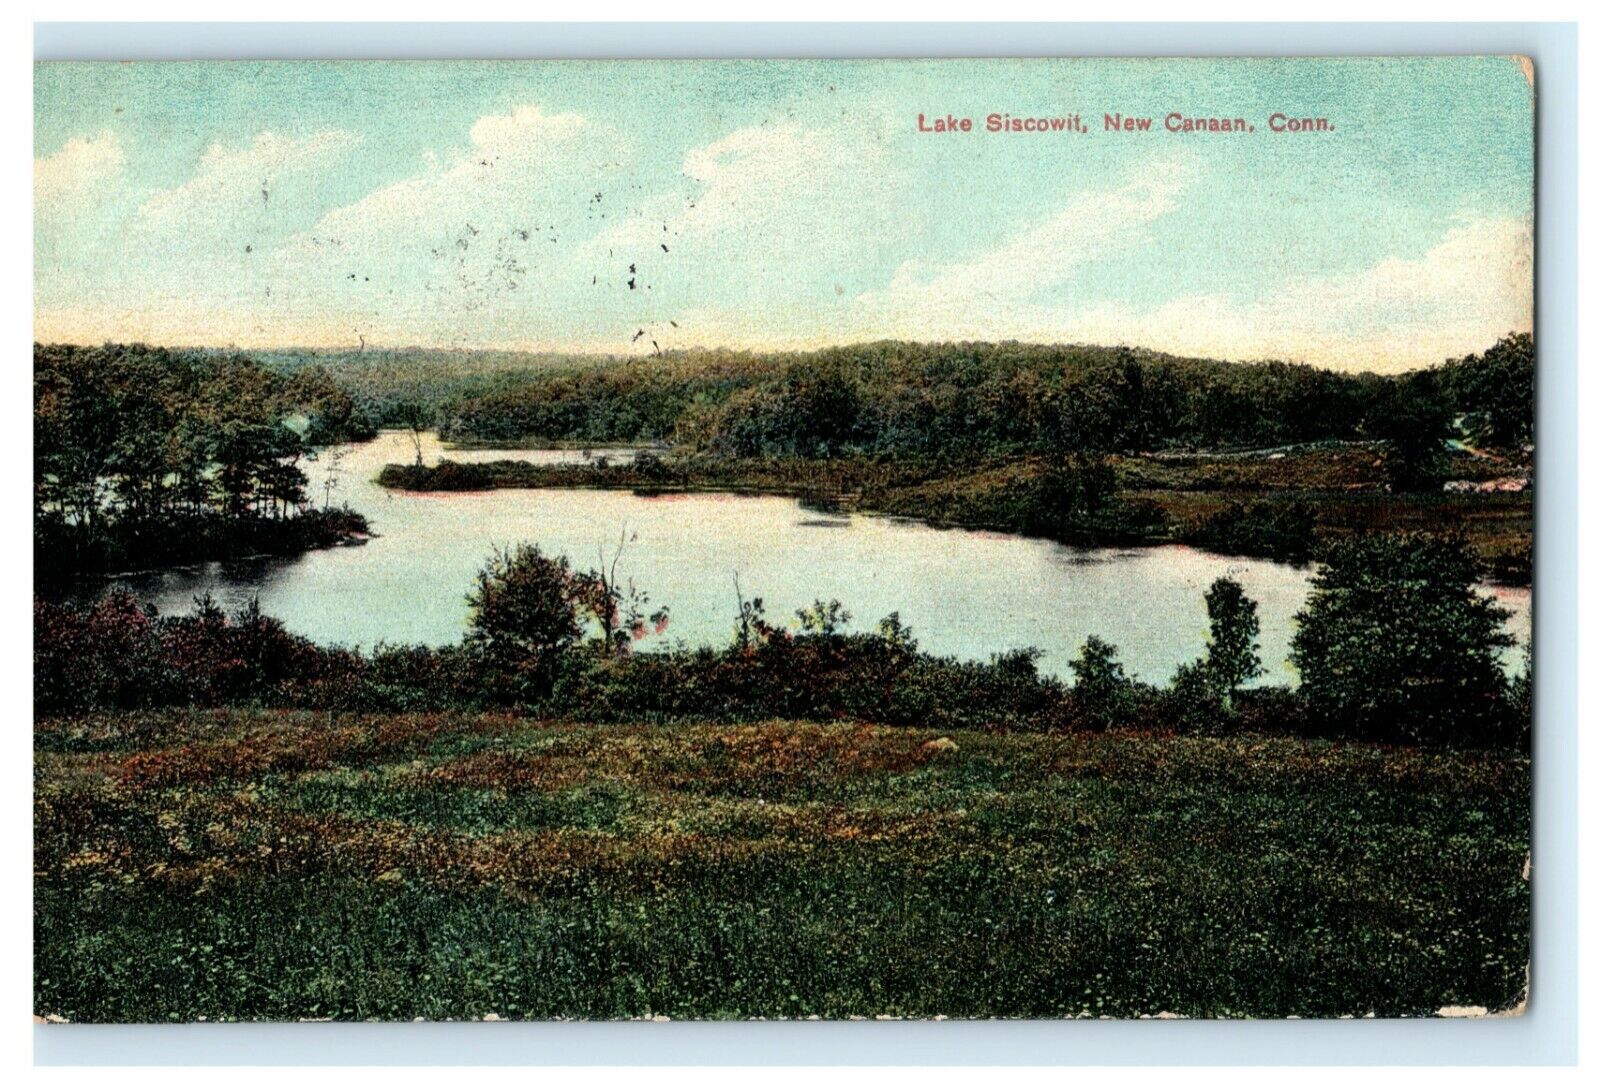 Lake Siscowit New Canaan Connecticut Rare View 1909 Vintage Antique Postcard 